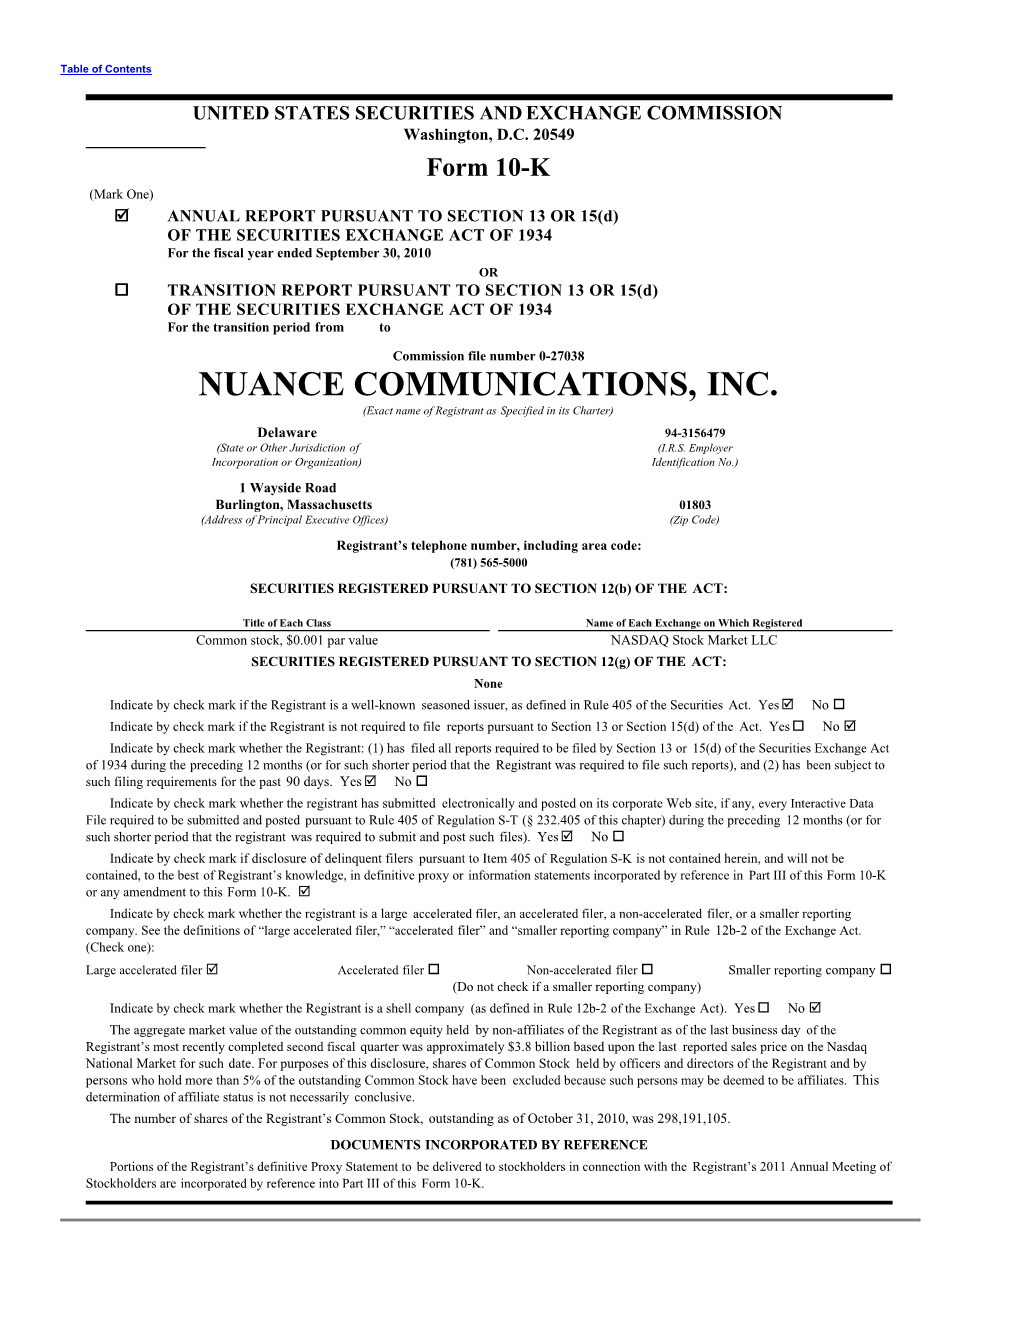 NUANCE COMMUNICATIONS, INC. (Exact Name of Registrant As Specified in Its Charter) Delaware 94-3156479 (State Or Other Jurisdiction of (I.R.S